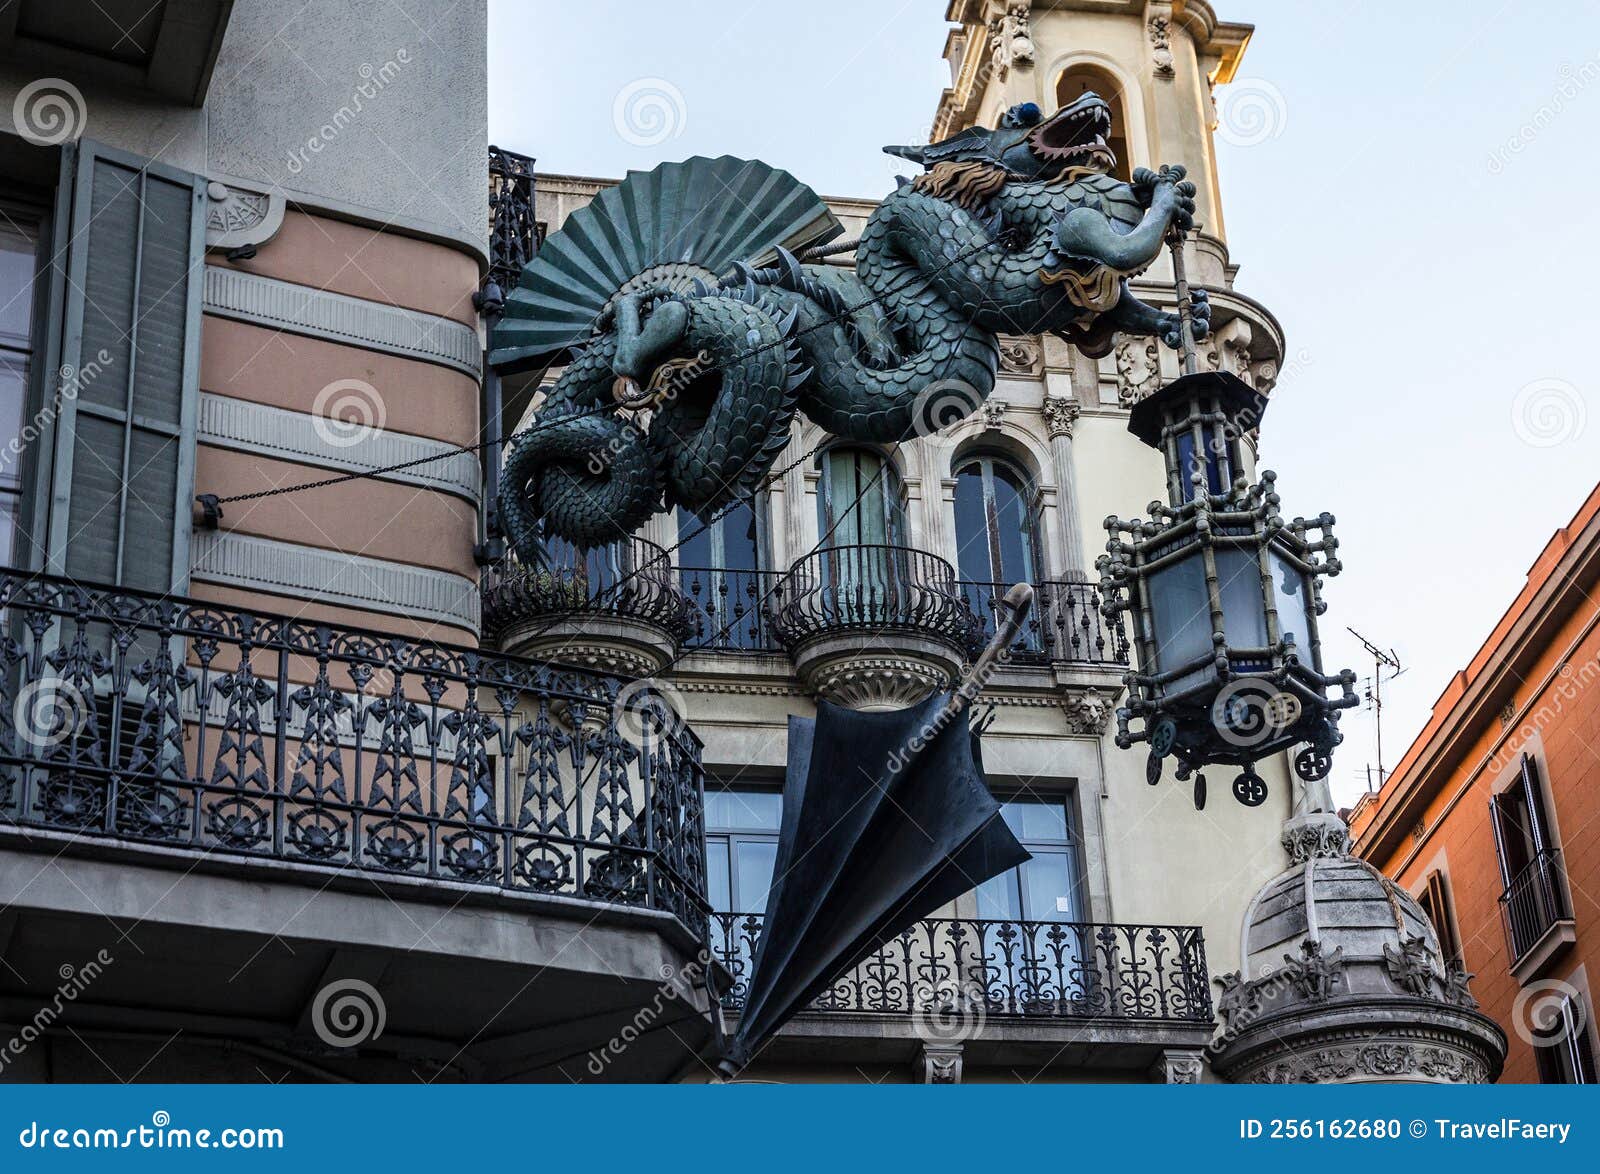 dragon on the house in barcelona, spain.